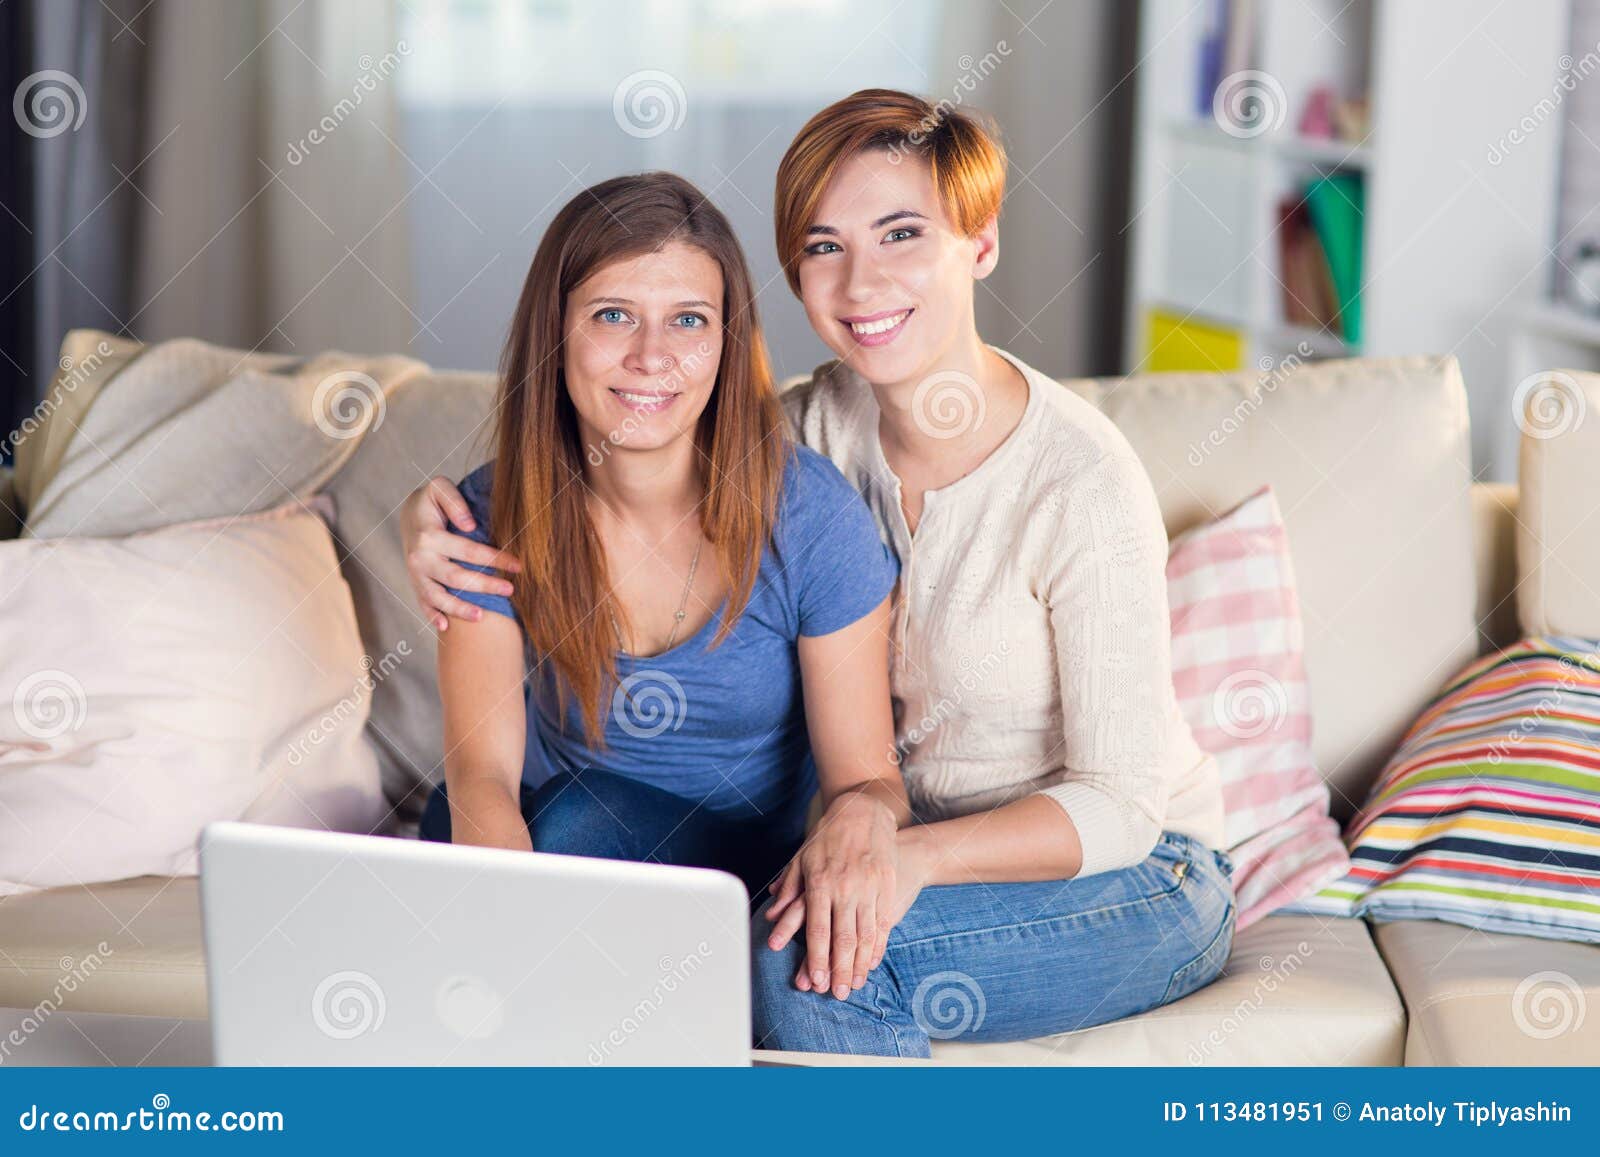 Lesbians On A Couch